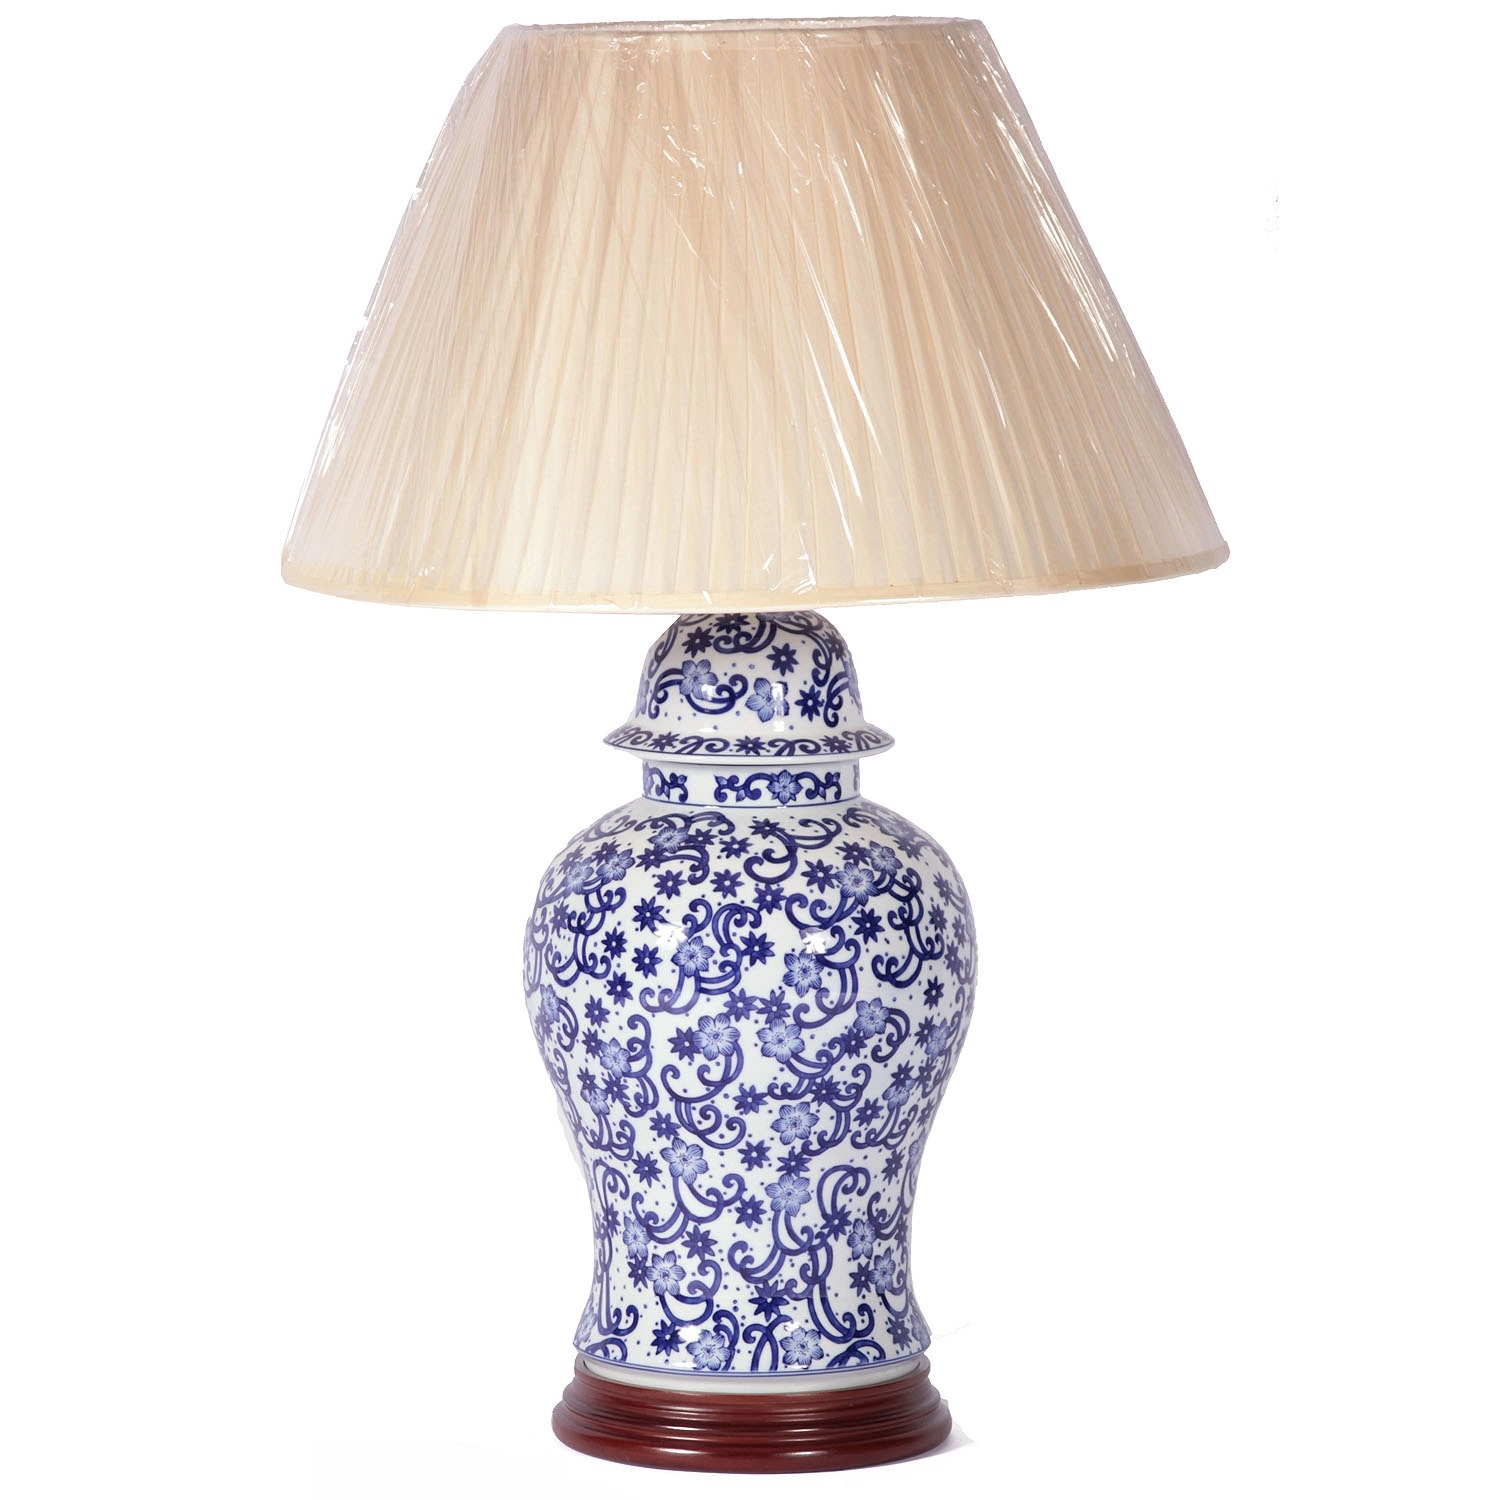 Hand painted ceramic lamp with shade